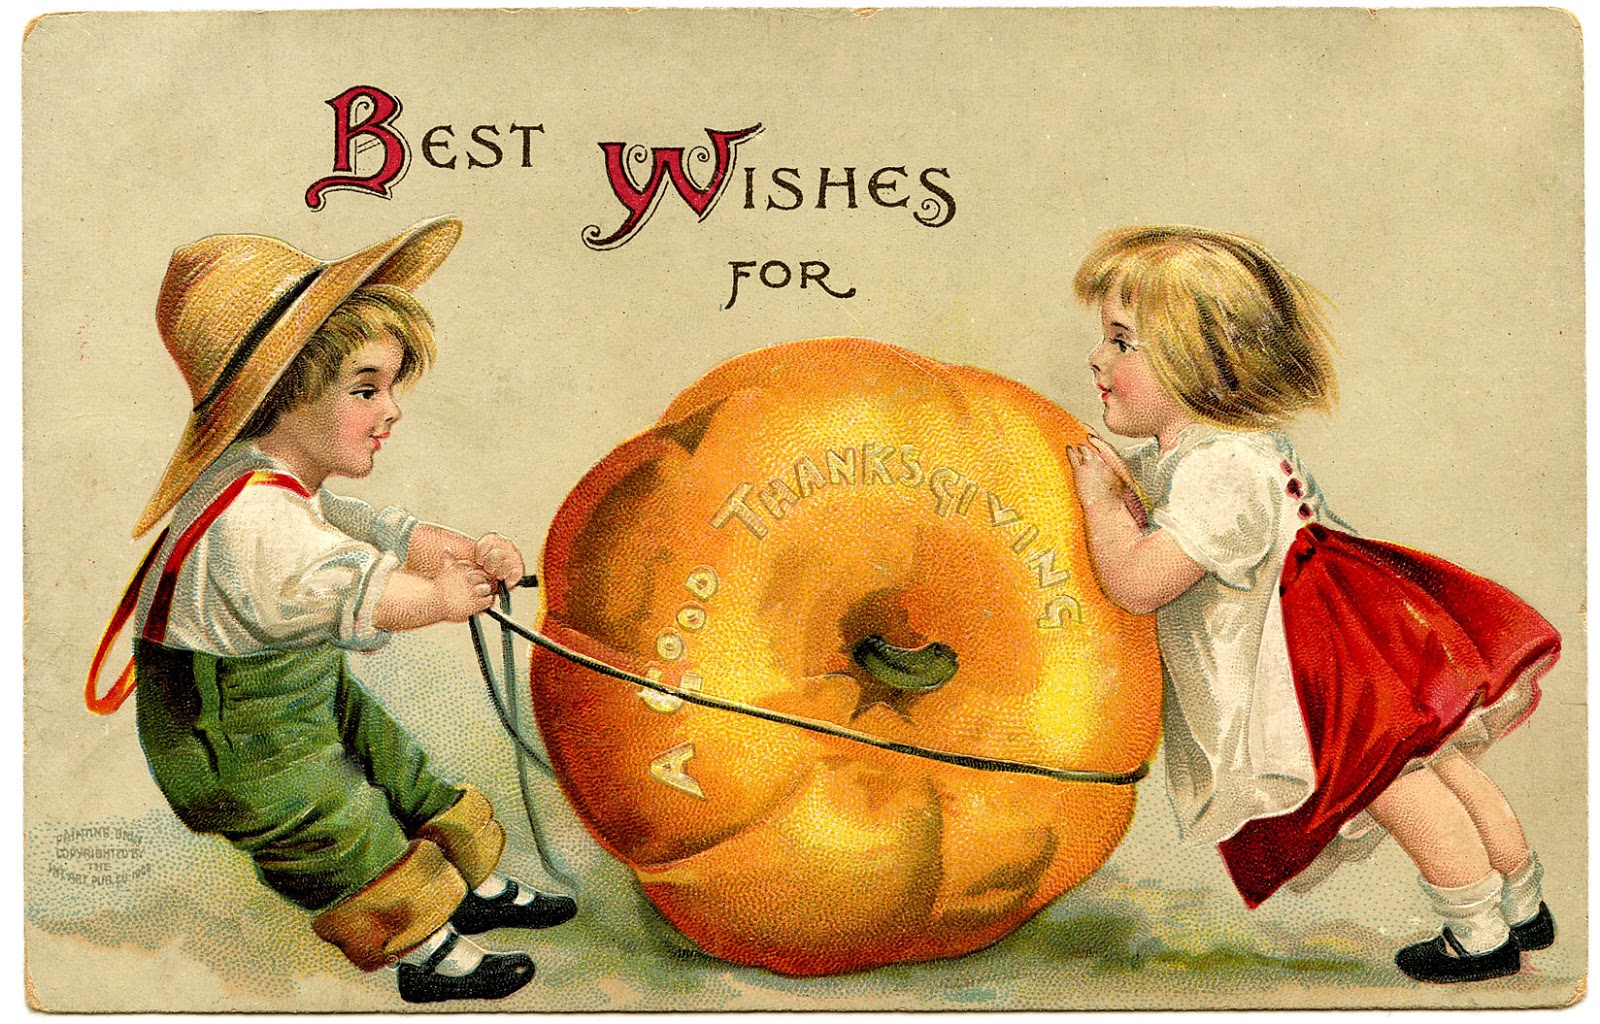 Vintage Thanksgiving Image   Cute Kids With Pumpkin   The Graphics